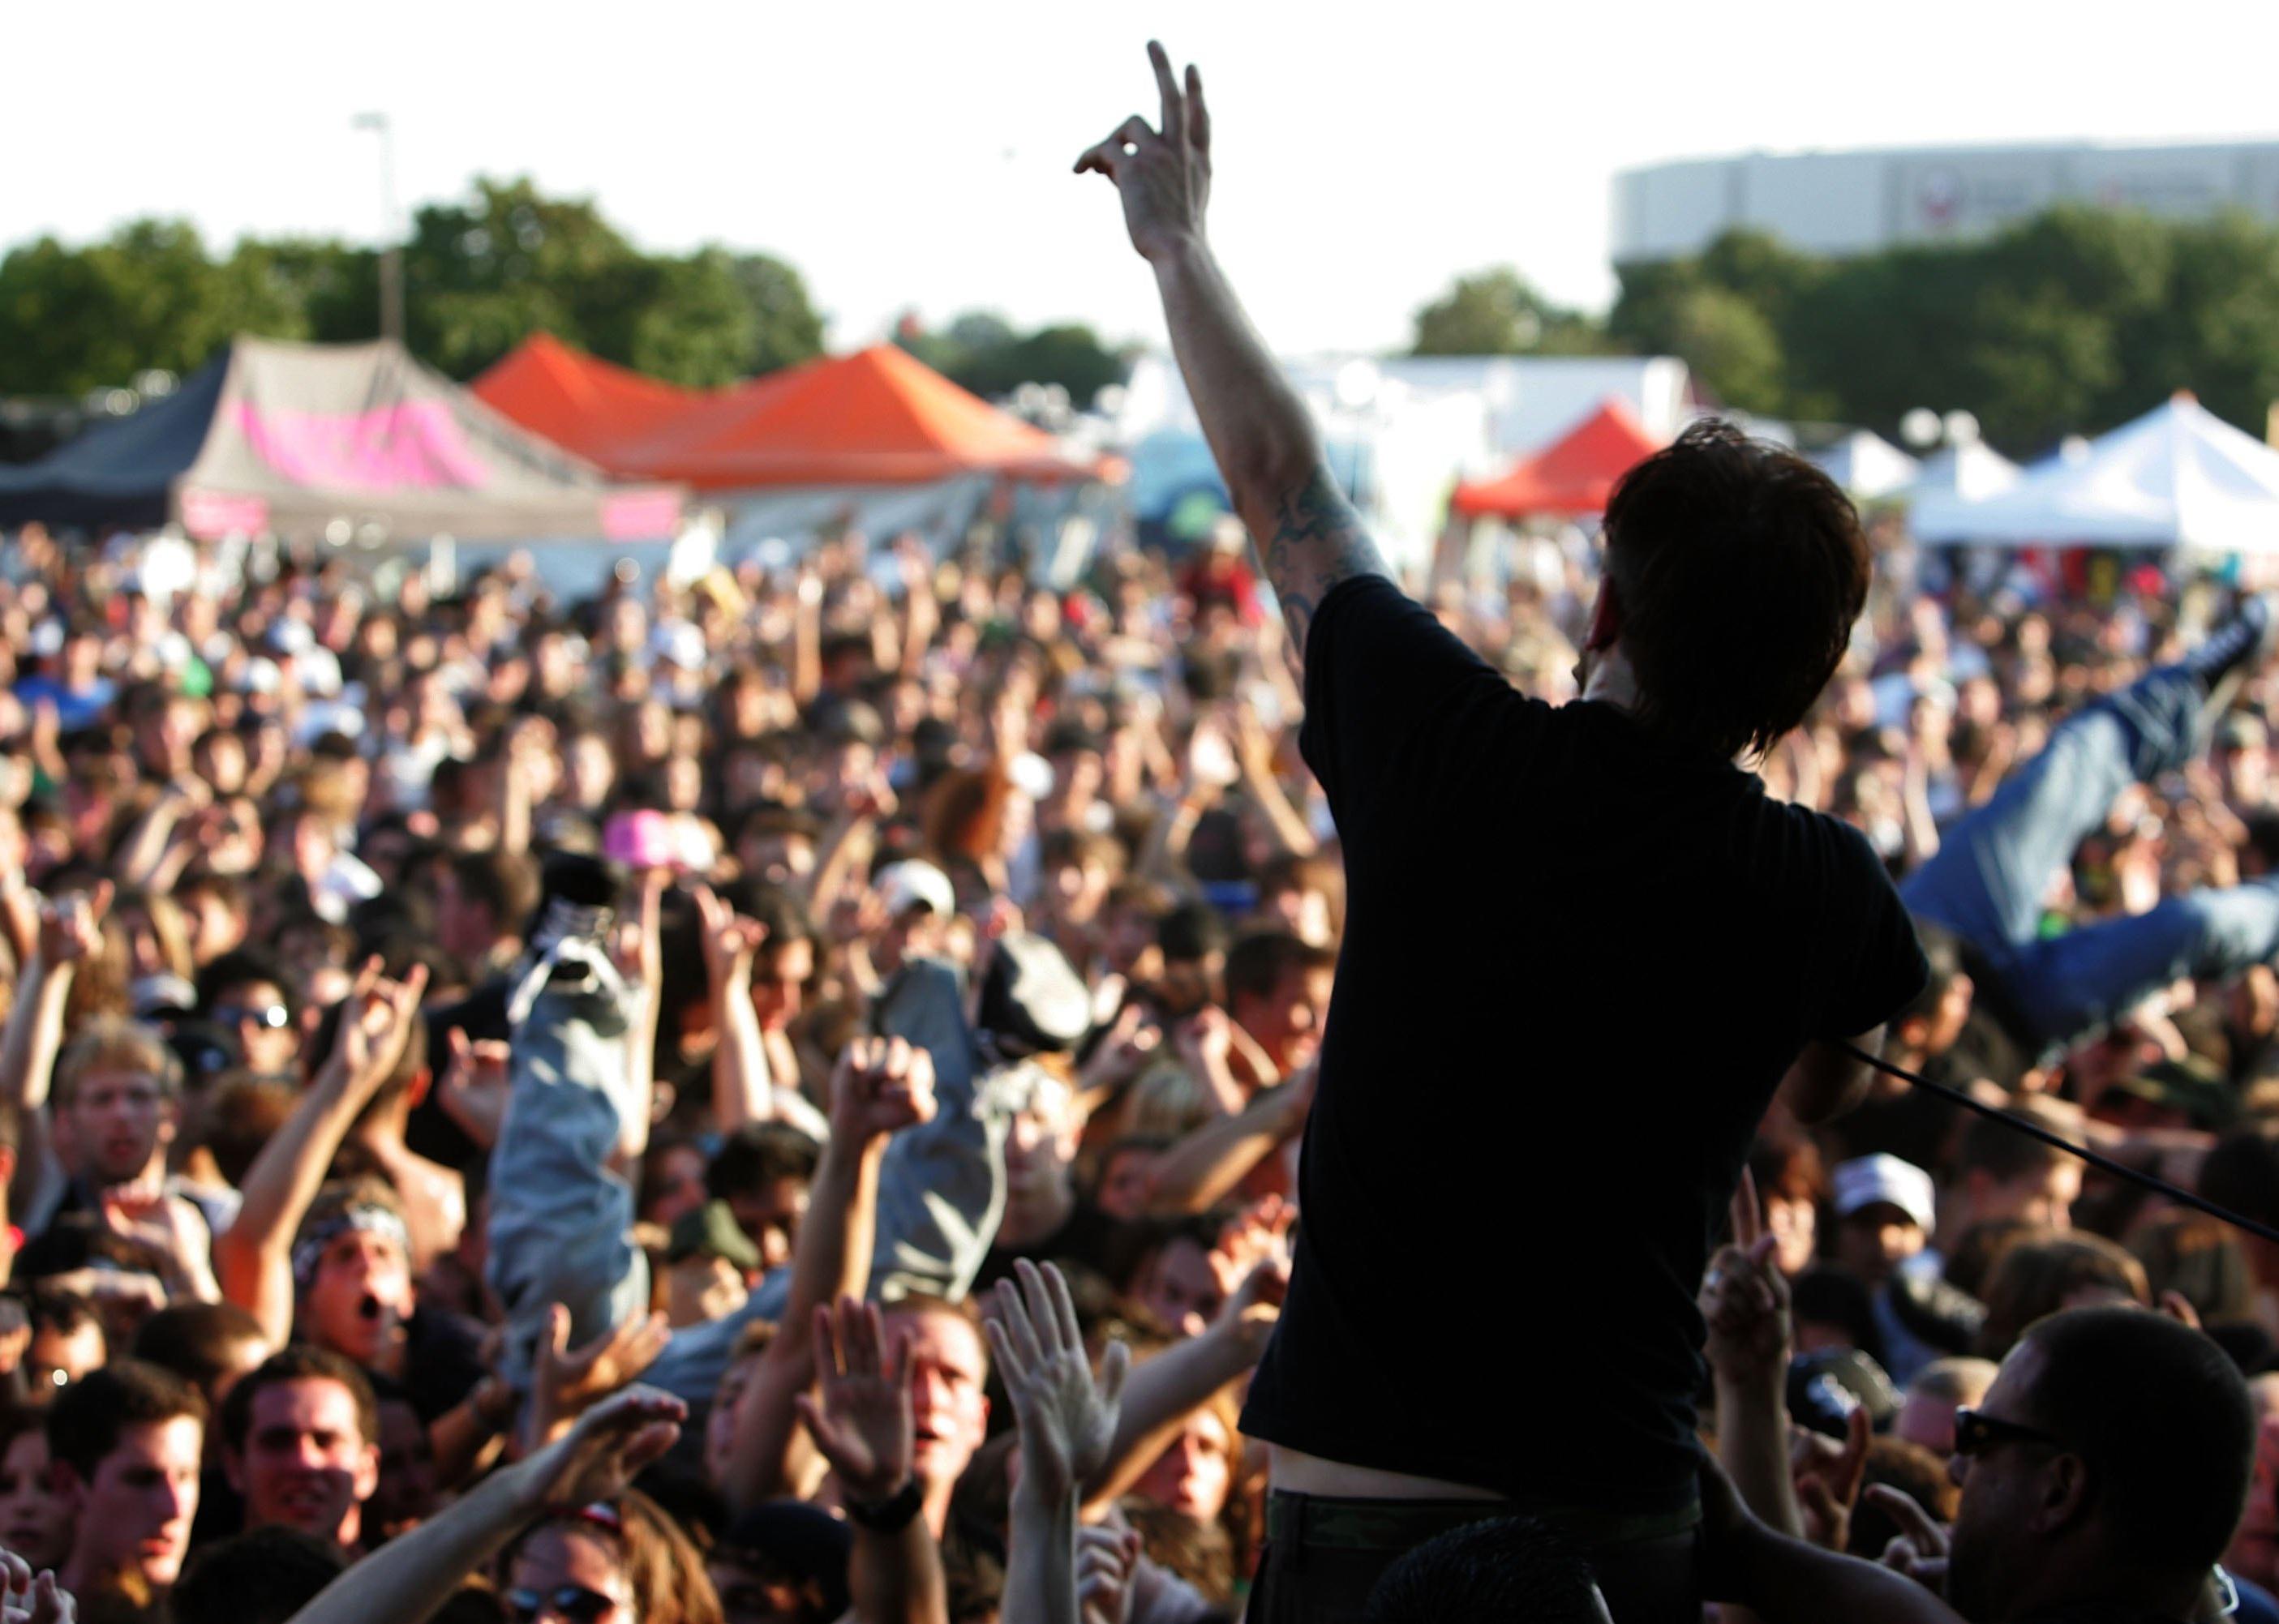 Back view of Tim McIlrath of the band Rise Against performing live onstage at the Vans Warped Tour.